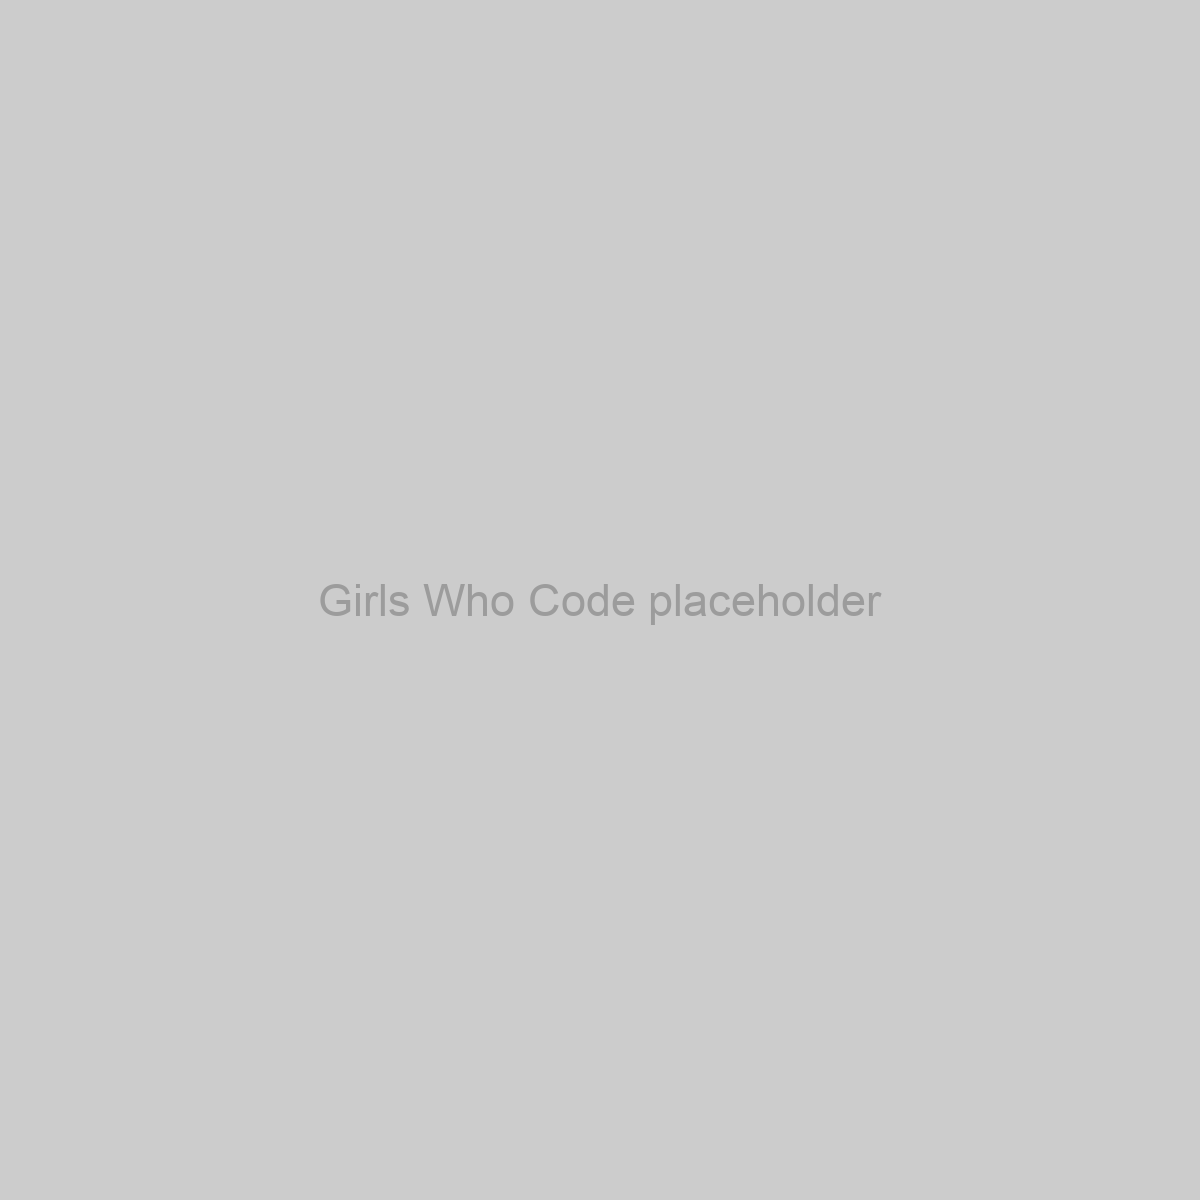 Girls Who Code Placeholder Image